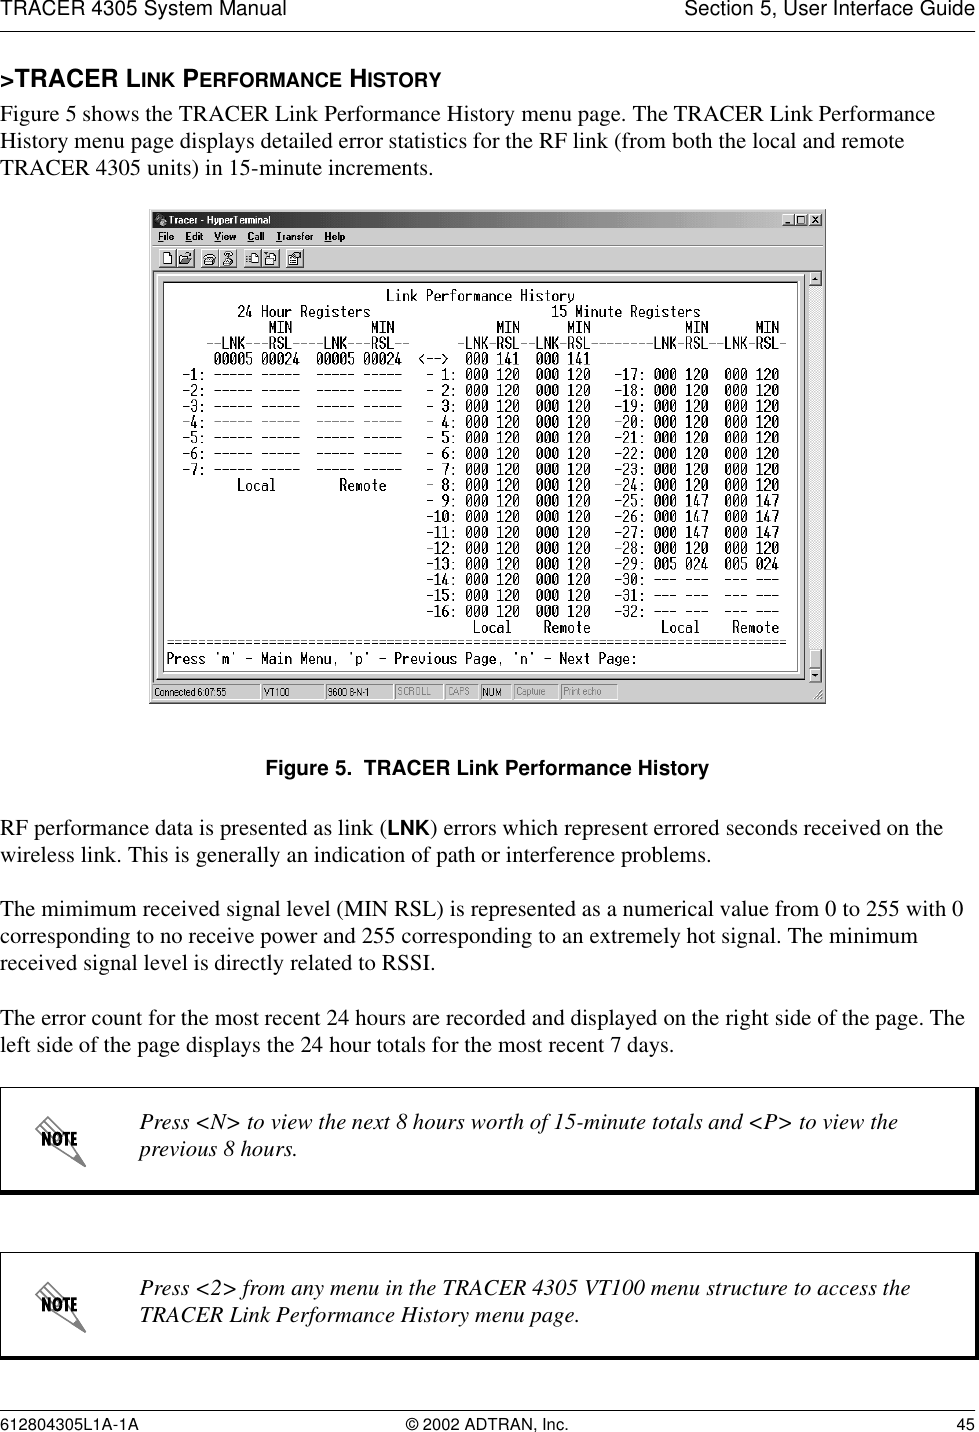 TRACER 4305 System Manual Section 5, User Interface Guide612804305L1A-1A © 2002 ADTRAN, Inc. 45&gt;TRACER LINK PERFORMANCE HISTORYFigure 5 shows the TRACER Link Performance History menu page. The TRACER Link Performance History menu page displays detailed error statistics for the RF link (from both the local and remote TRACER 4305 units) in 15-minute increments. Figure 5.  TRACER Link Performance HistoryRF performance data is presented as link (LNK) errors which represent errored seconds received on the wireless link. This is generally an indication of path or interference problems.The mimimum received signal level (MIN RSL) is represented as a numerical value from 0 to 255 with 0 corresponding to no receive power and 255 corresponding to an extremely hot signal. The minimum received signal level is directly related to RSSI.The error count for the most recent 24 hours are recorded and displayed on the right side of the page. The left side of the page displays the 24 hour totals for the most recent 7 days. Press &lt;N&gt; to view the next 8 hours worth of 15-minute totals and &lt;P&gt; to view the previous 8 hours.Press &lt;2&gt; from any menu in the TRACER 4305 VT100 menu structure to access the TRACER Link Performance History menu page.